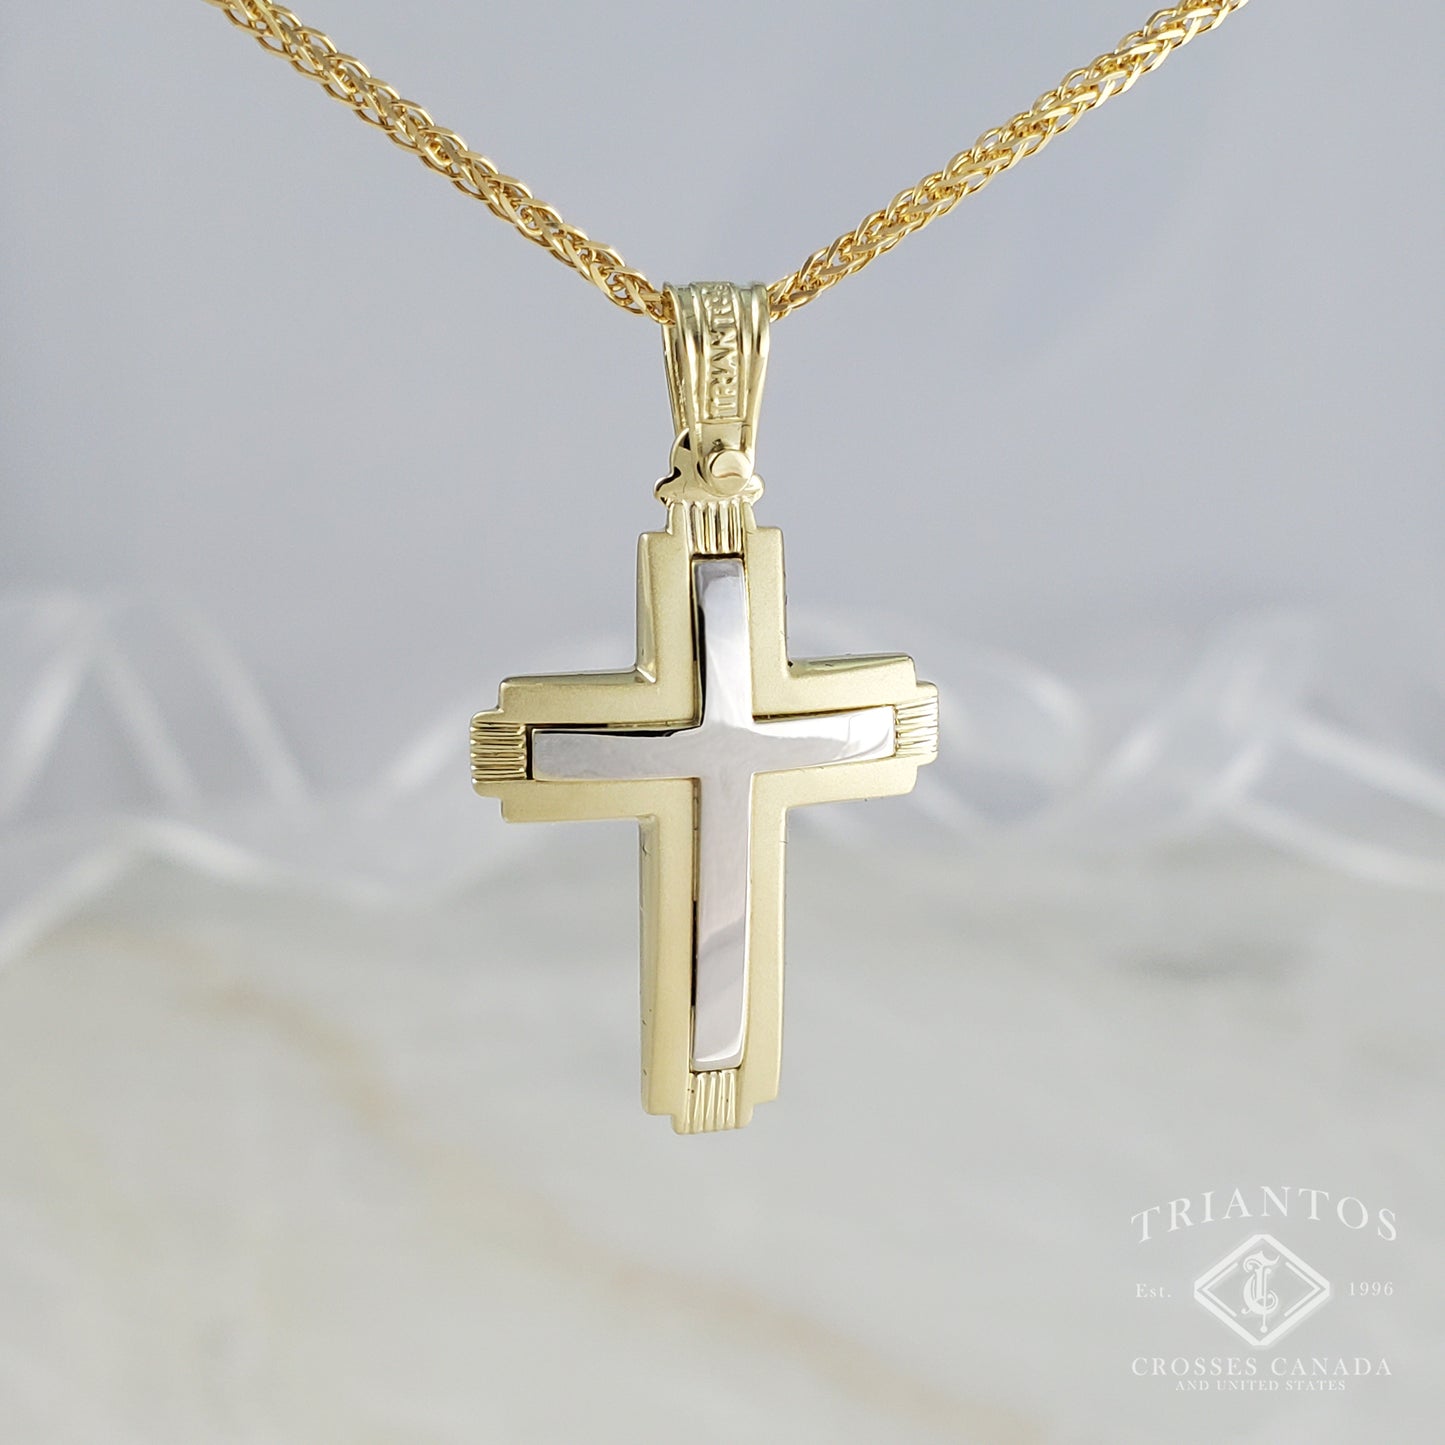 Modern dual tone, white and yellow gold, cross pendant outlined in matte and polish middle finish.